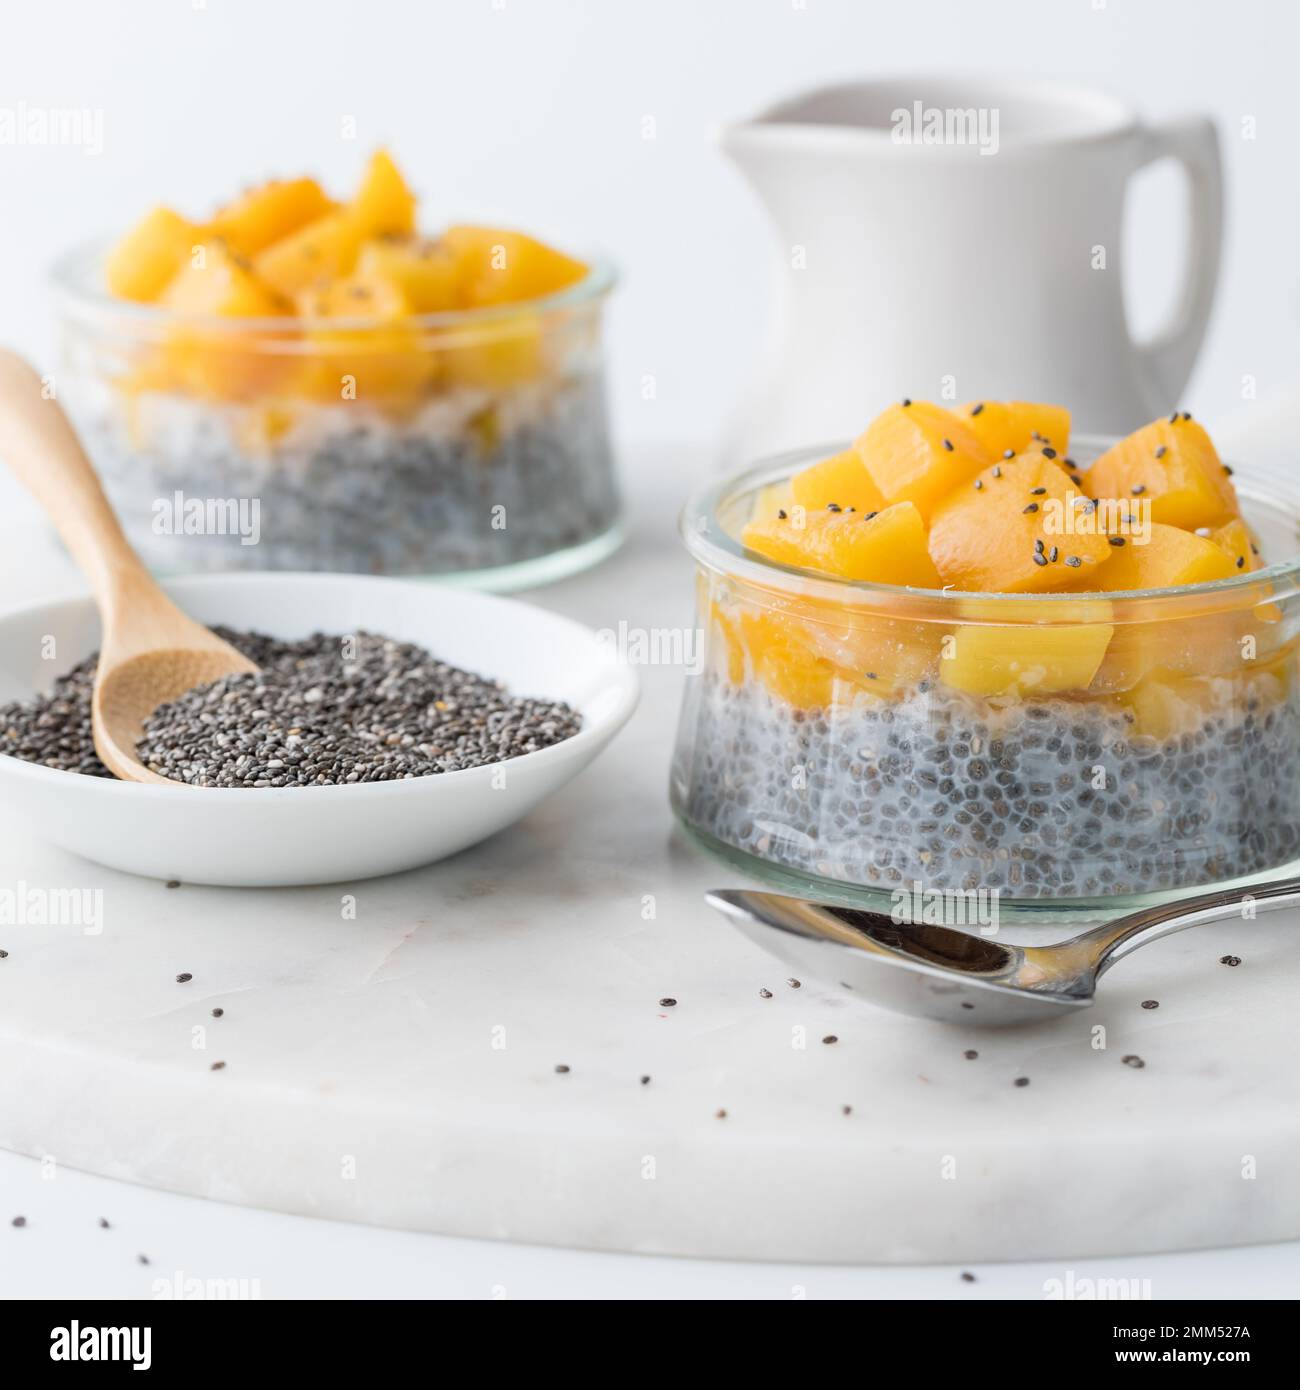 Two chia pudding parfaits topped with diced mangos and a bowl of chia seeds. Stock Photo